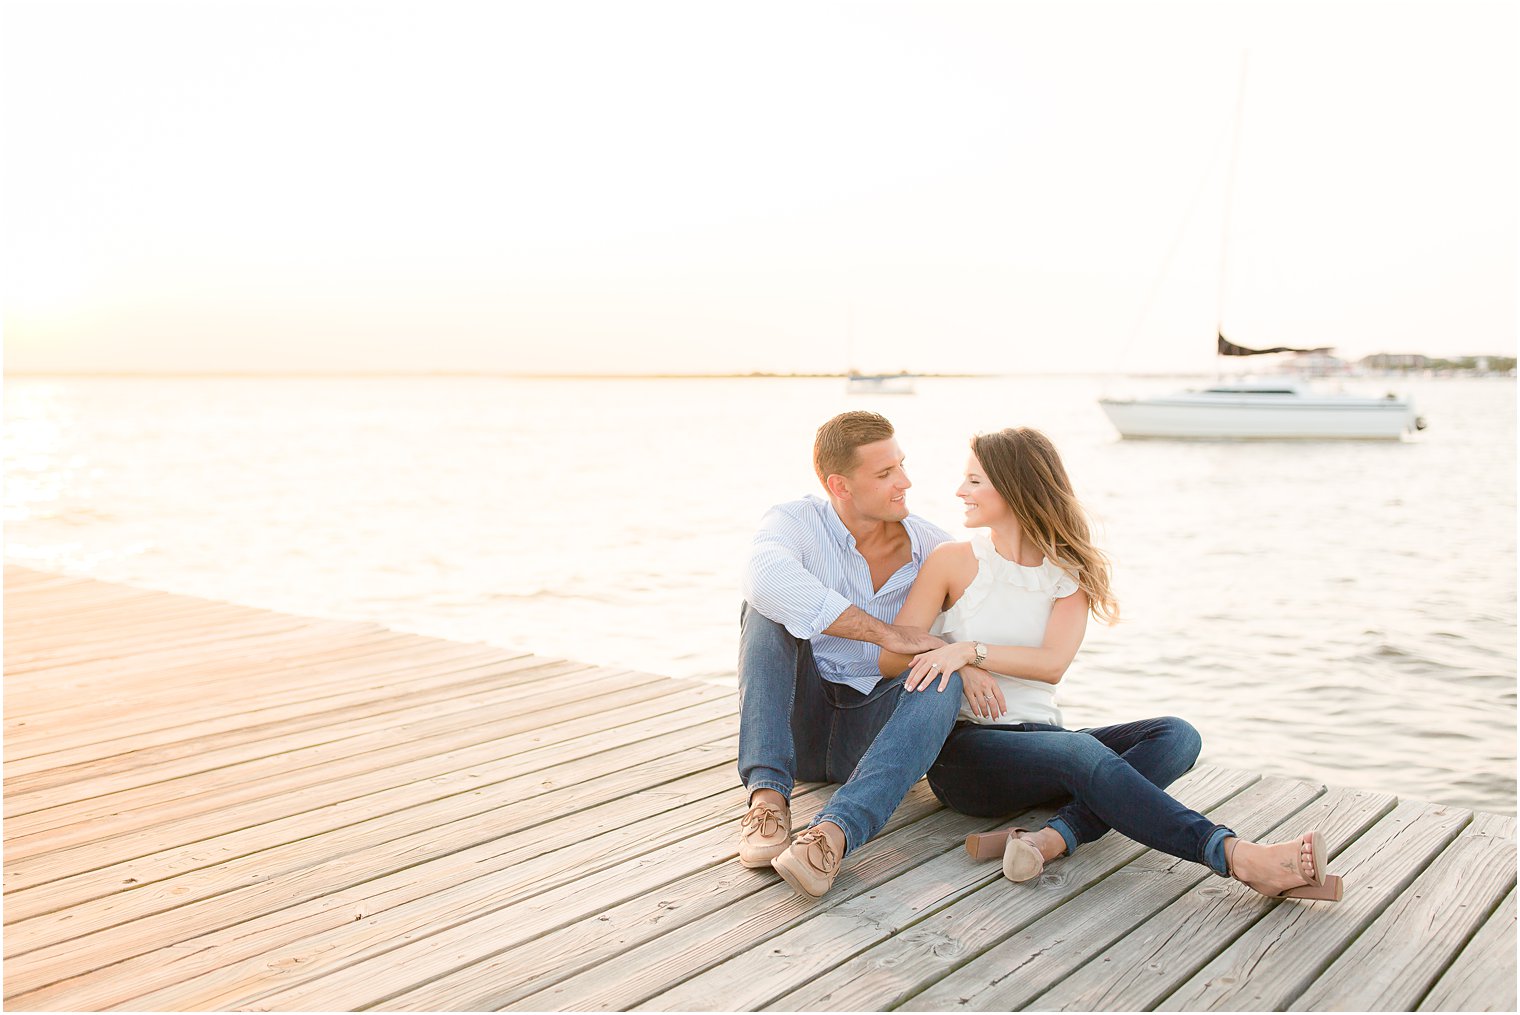 Lavallette NJ Engagement Session on the pier with Idalia Photography